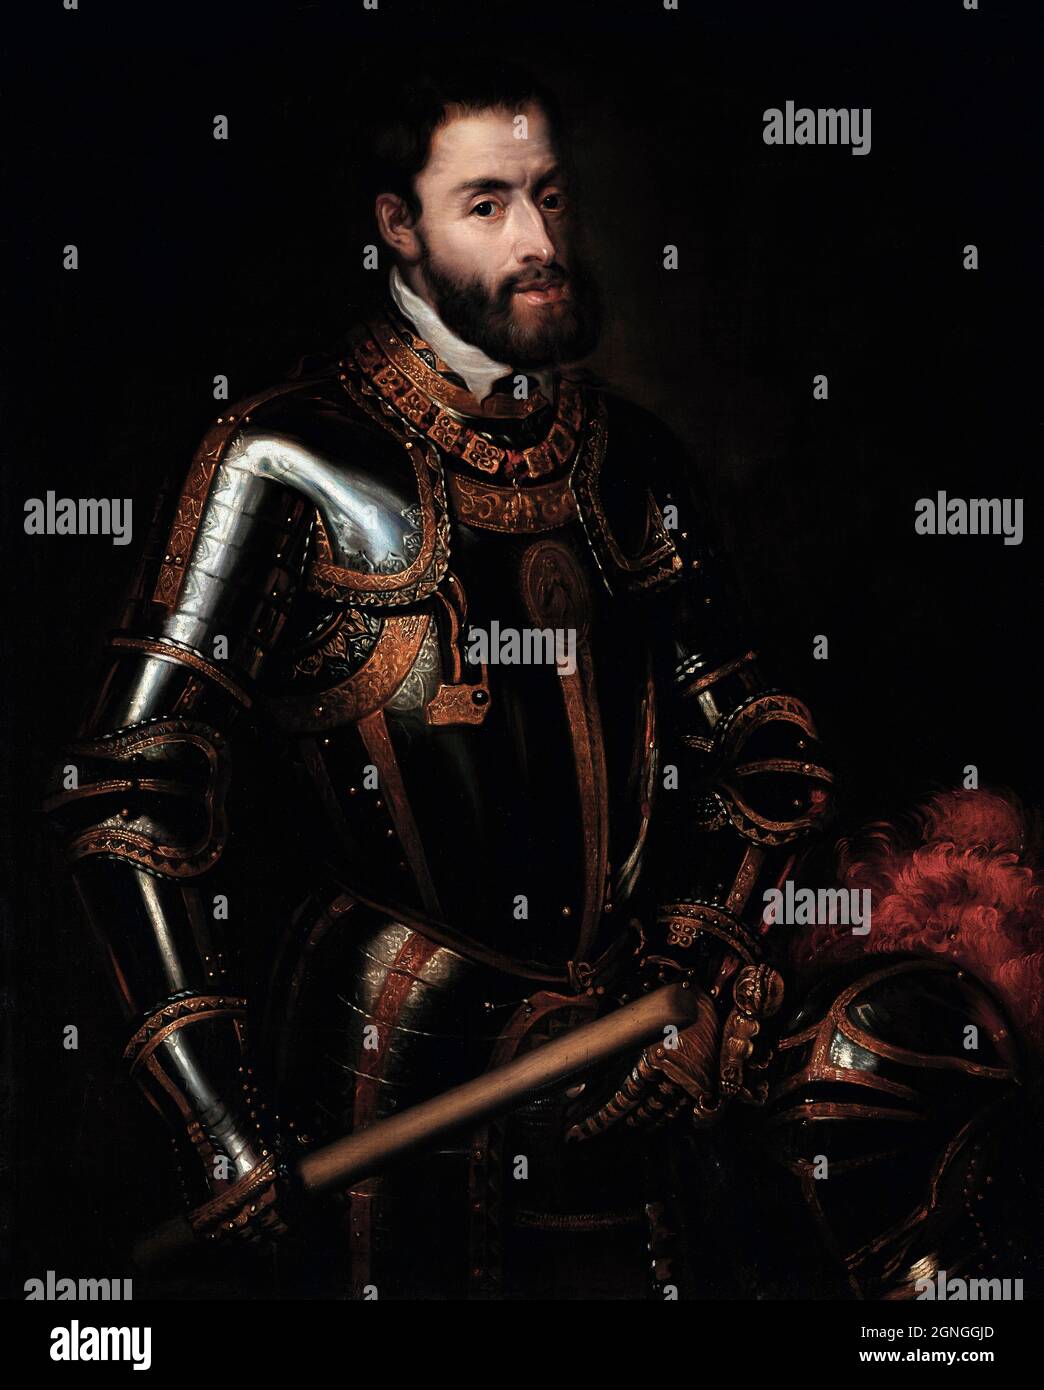 Emperor Charles V (1500-1558) by Peter Paul Rubens (or workshop), oil on canvas, c. 1603 Stock Photo